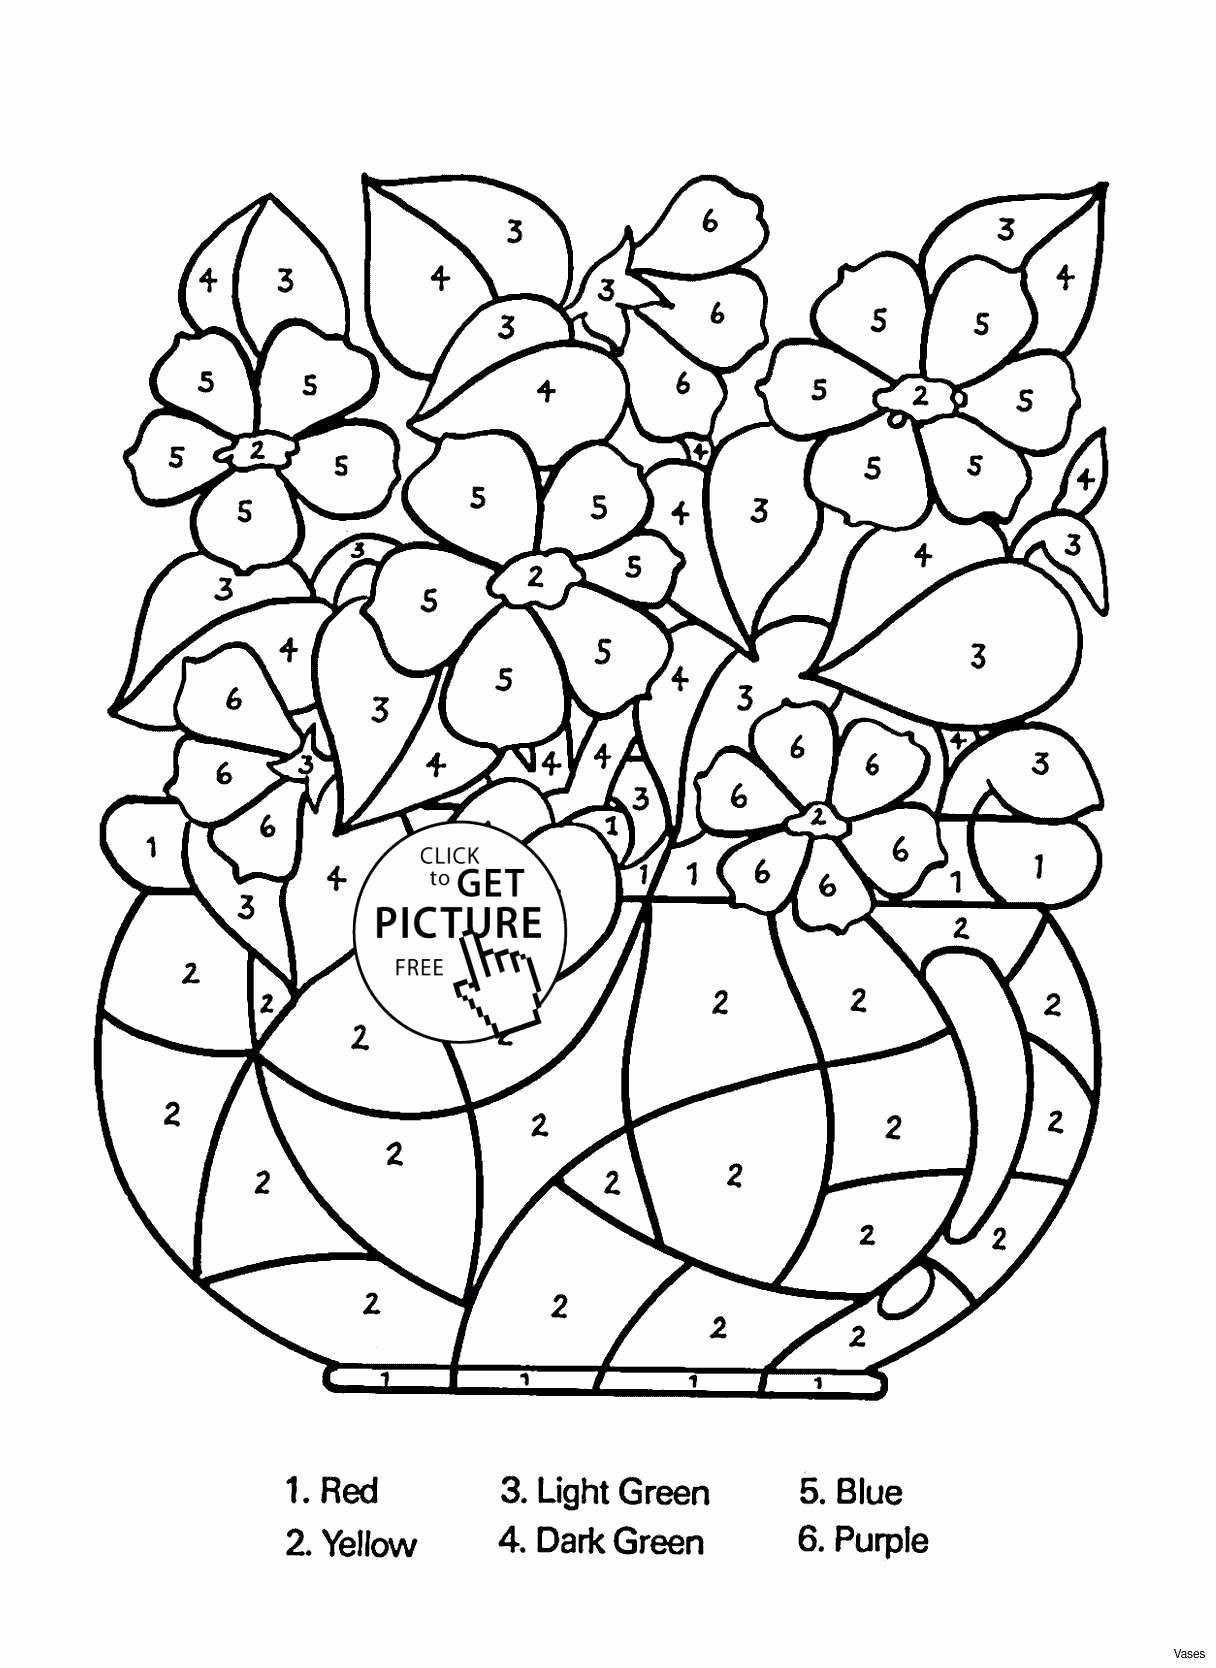 12 Spectacular Off White Vase 2024 free download off white vase of green black and white kitchen beautiful vases flower vase coloring for green black and white kitchen beautiful vases flower vase coloring page pages flowers in a top